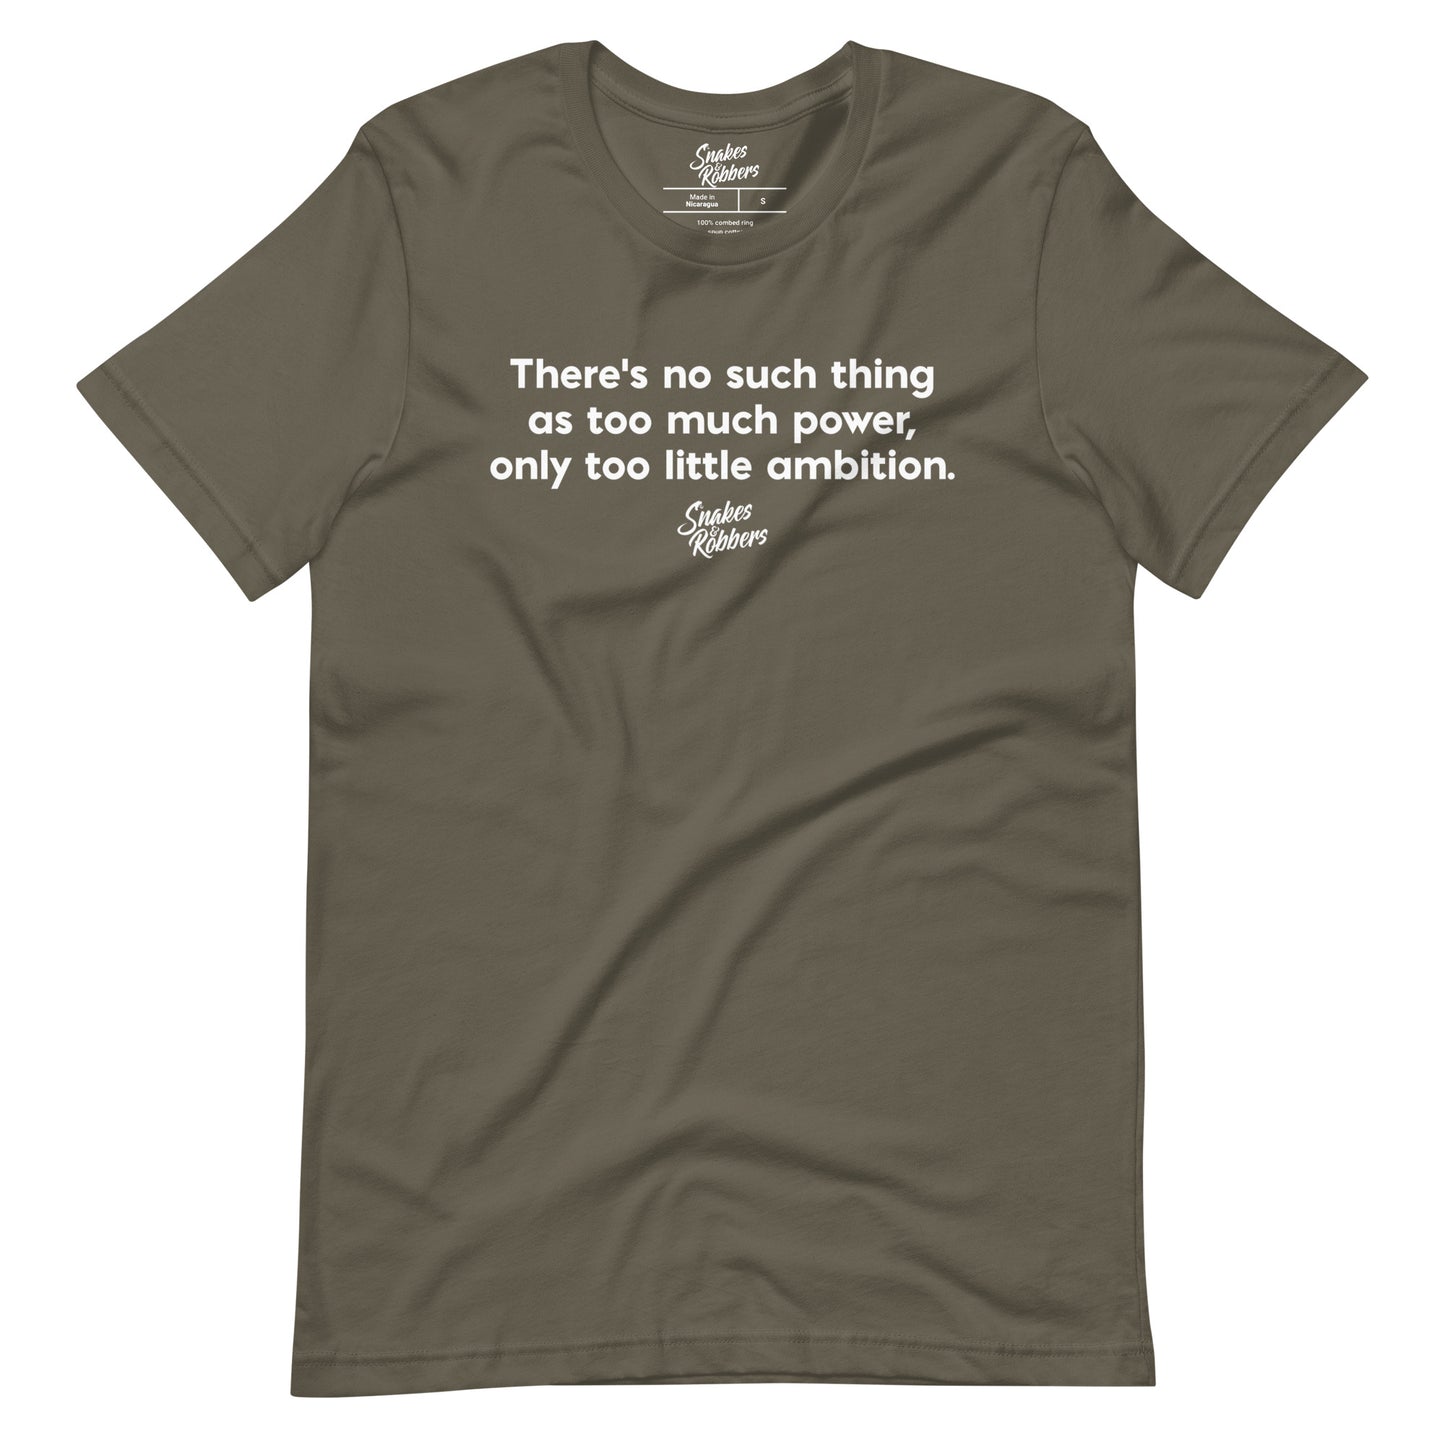 There's no such thing as too much power Unisex Retail Fit T-Shirt